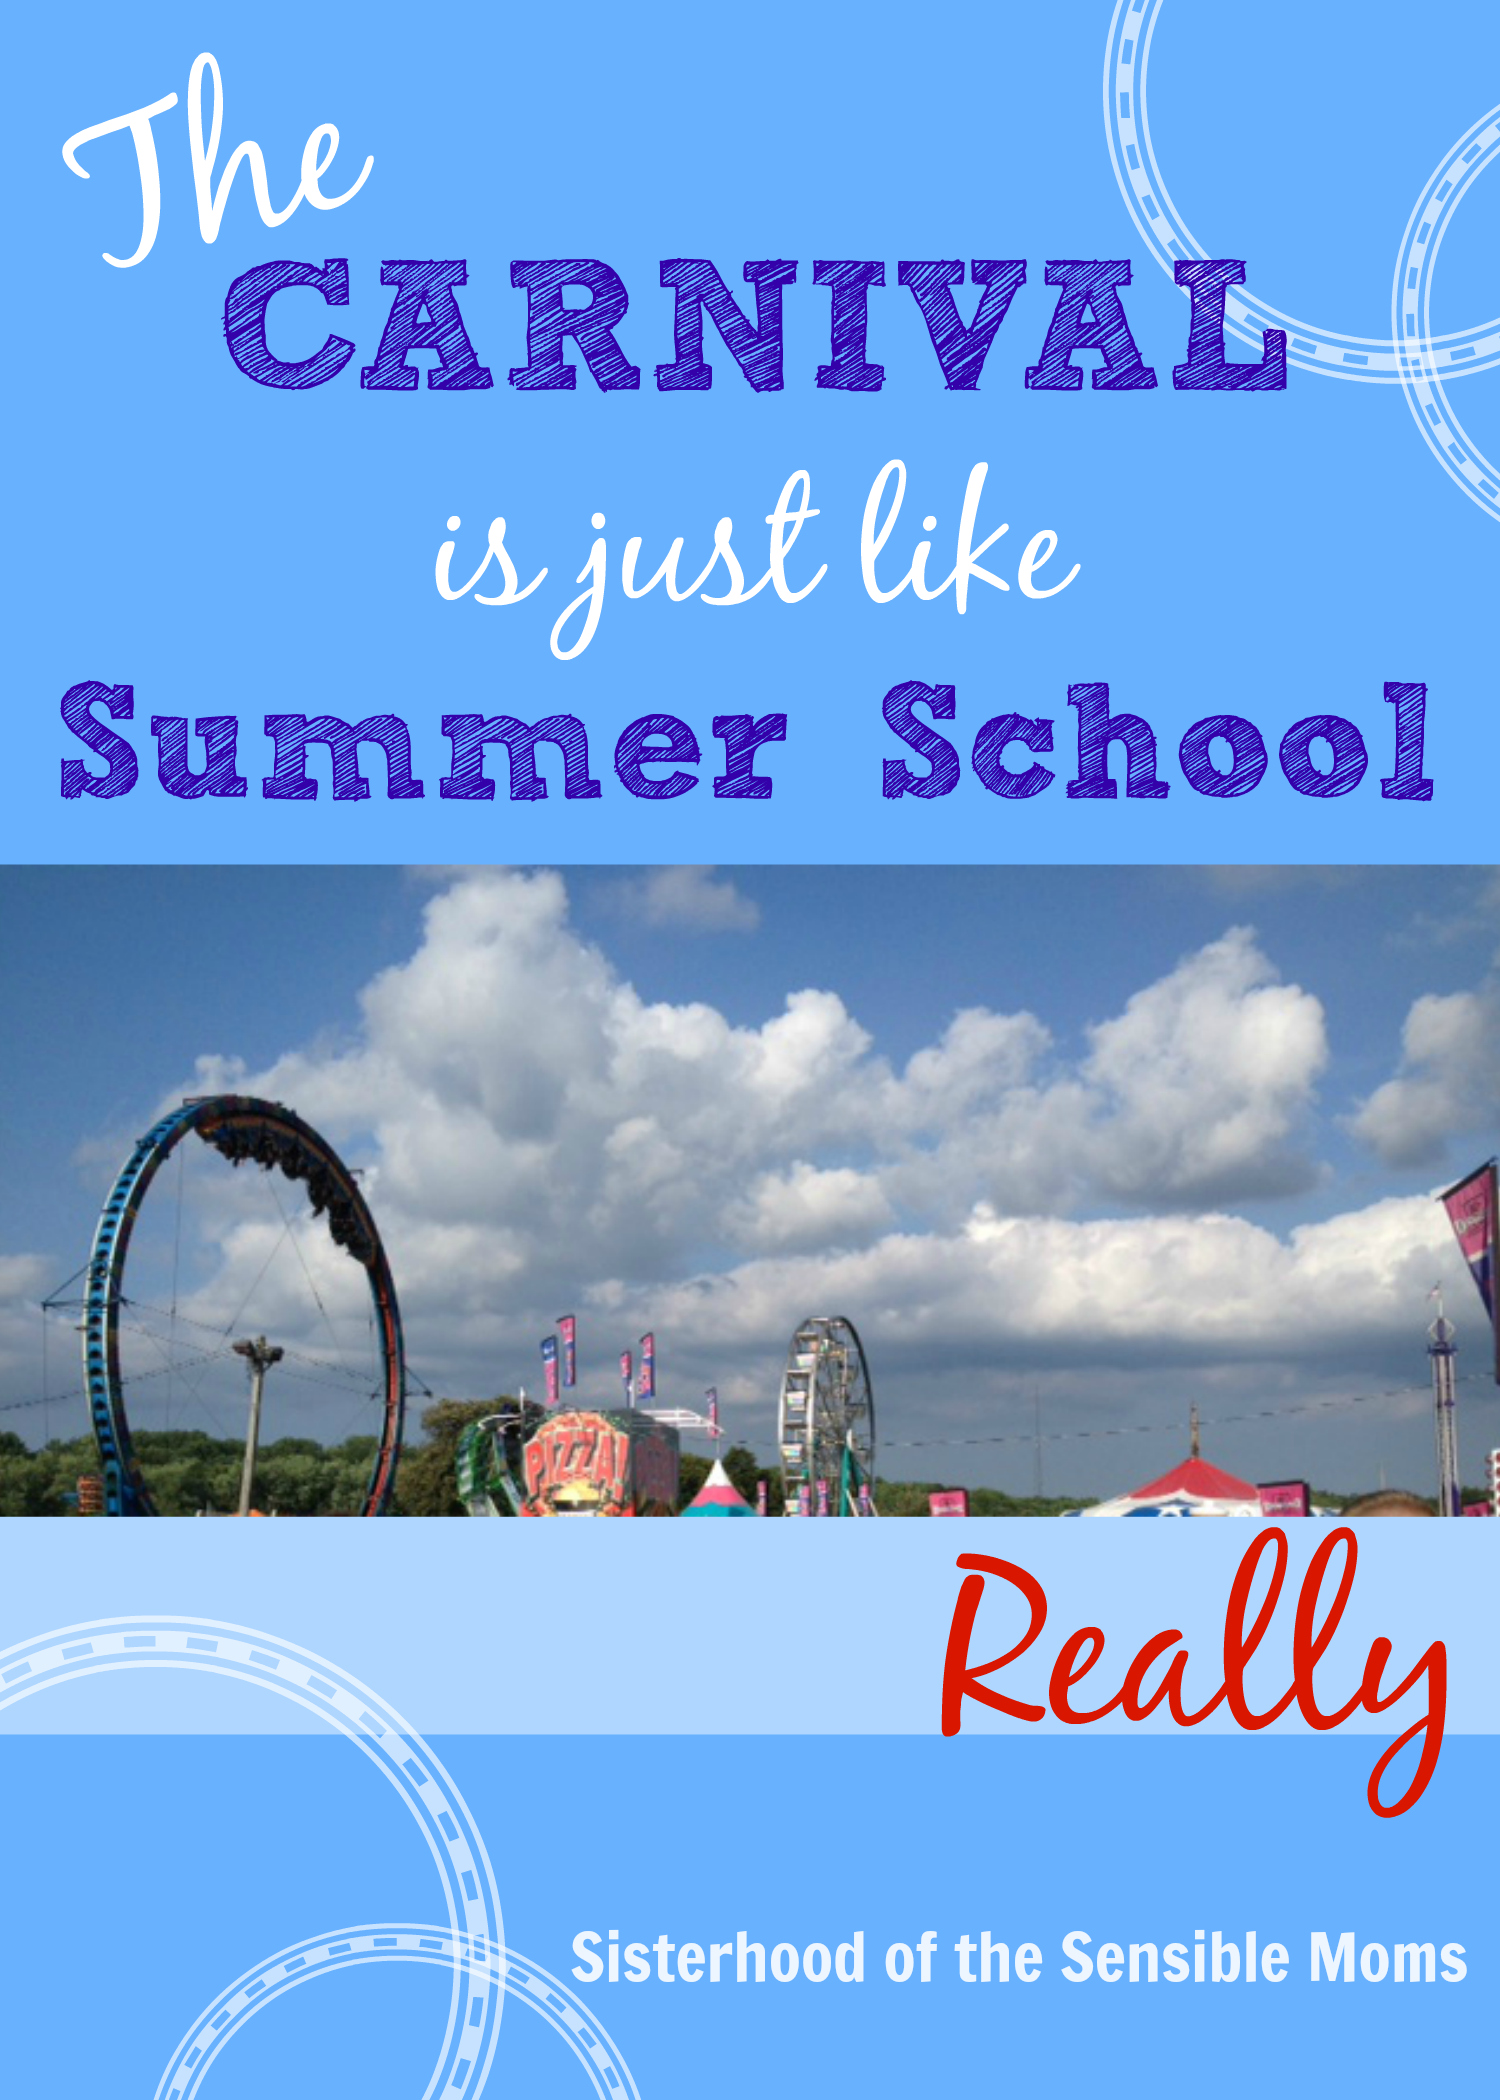 This summer, can you actually see the knowledge oozing out of your kids' ears like a Popsicle melting on a parking lot? Our solution? The Carnival is just like summer school. Really. From Sisterhood of the Sensible Moms.